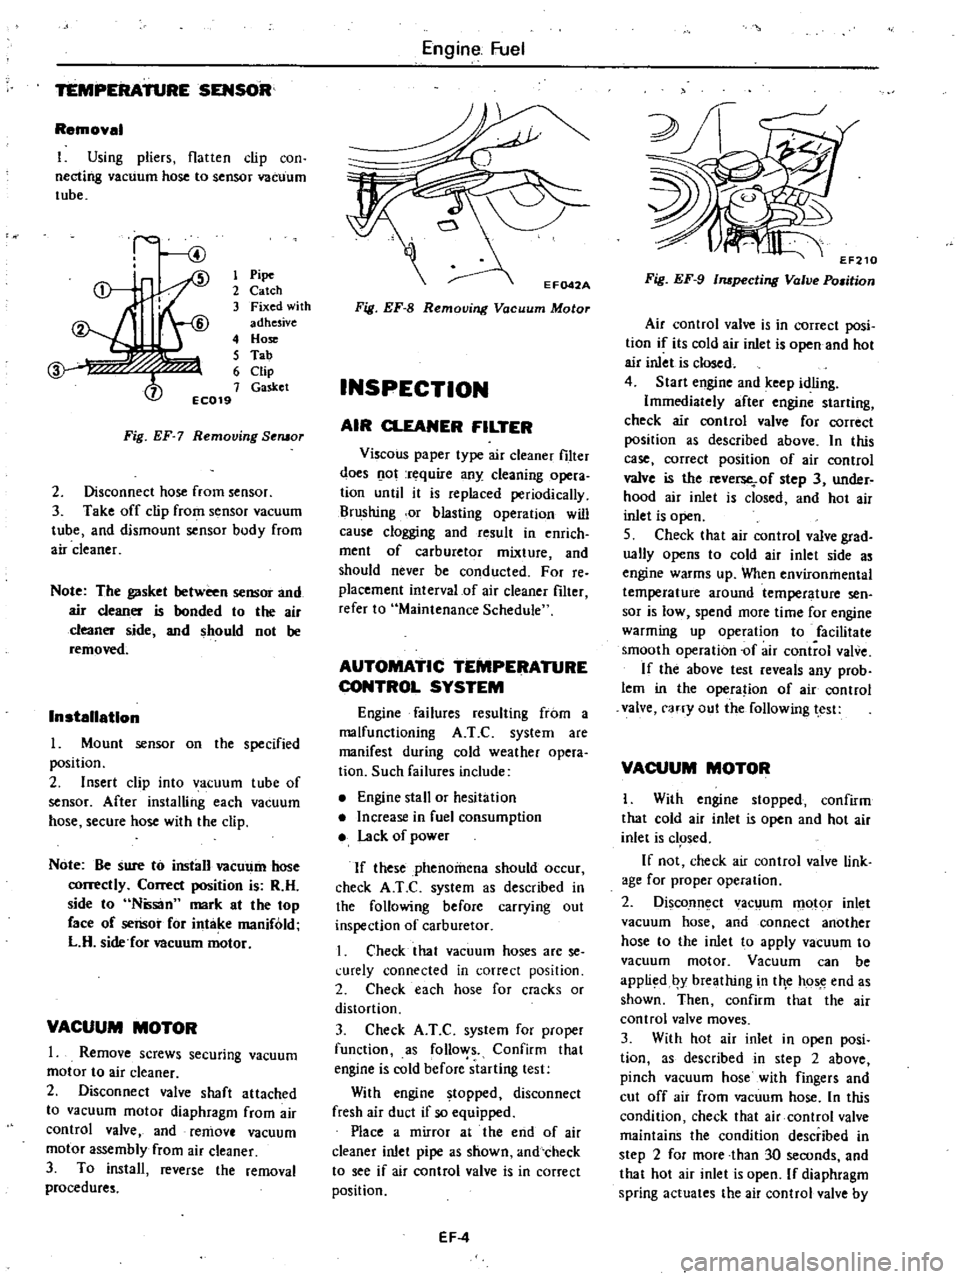 DATSUN 210 1979  Service Manual 
TEMPERATURE 
SENSOR

Removal

I

Using 
pliers 
flatten

clip 
con

necting 
vacuum

hose 
to

sensor 
vacuum

tube

1

Pipe

2 
Catch

3 
Fixed 
with

adhesive

4 
Hose

5 
Tab

6

Clip

7 
Gasket

